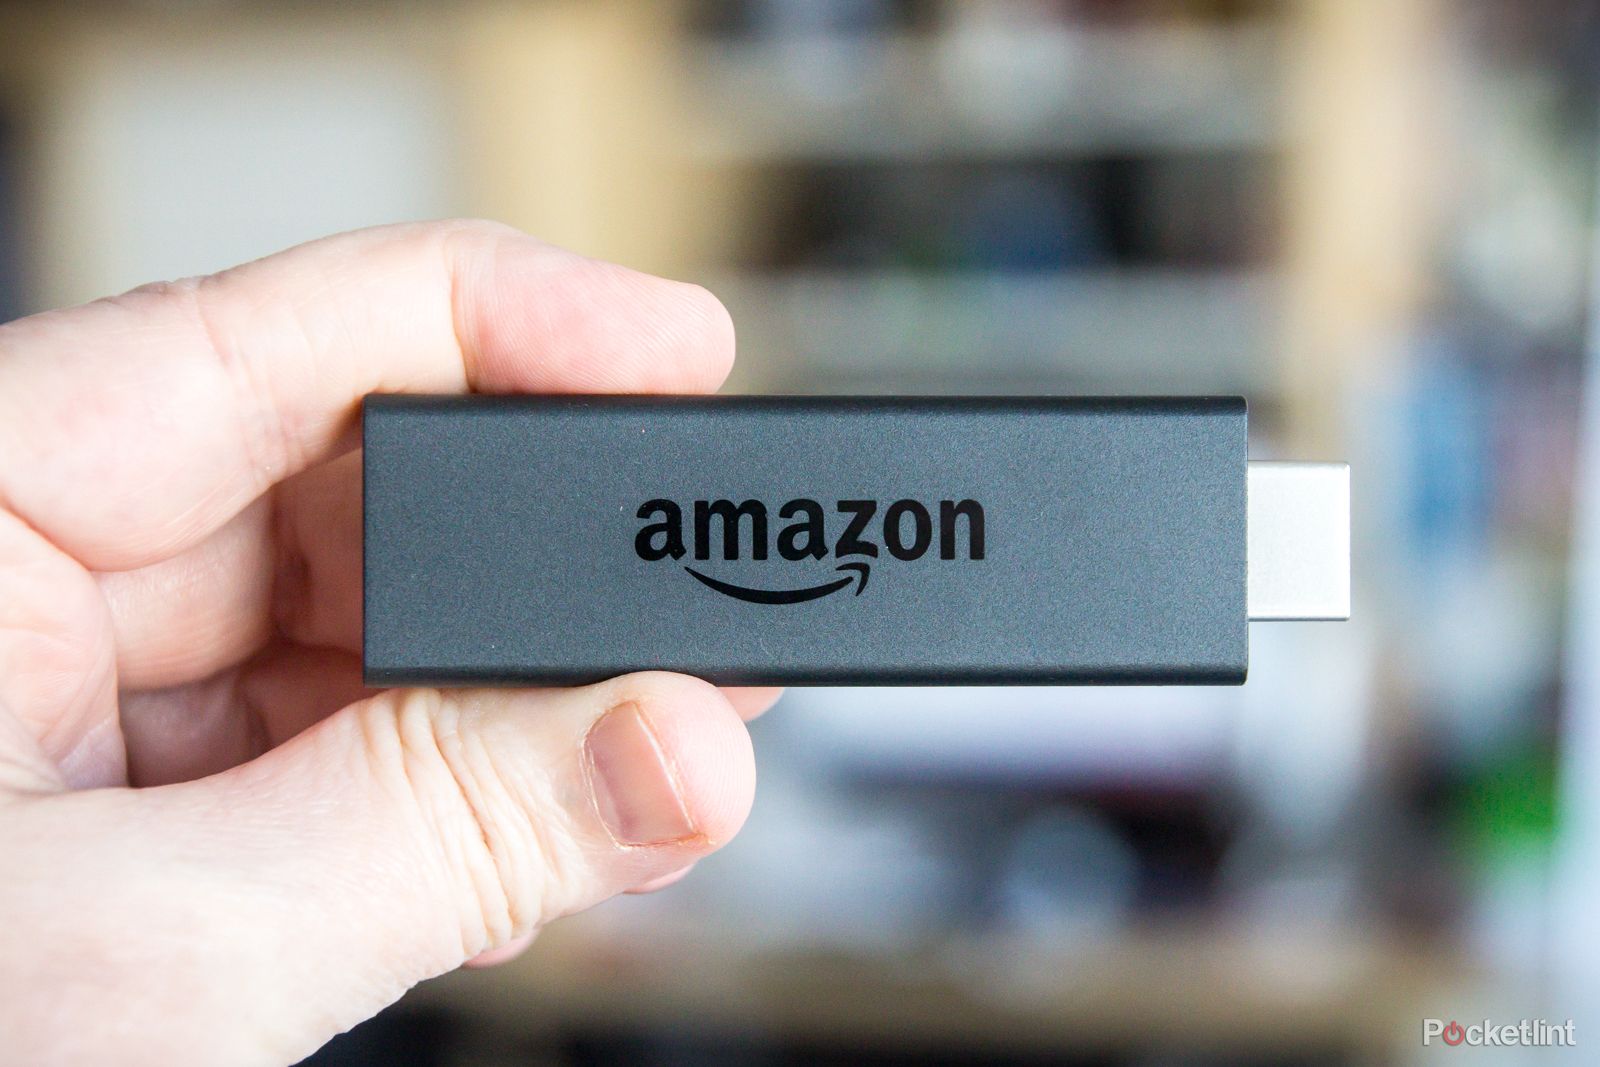 Fire TV Stick: An Accessibility Review – Perkins School for the Blind